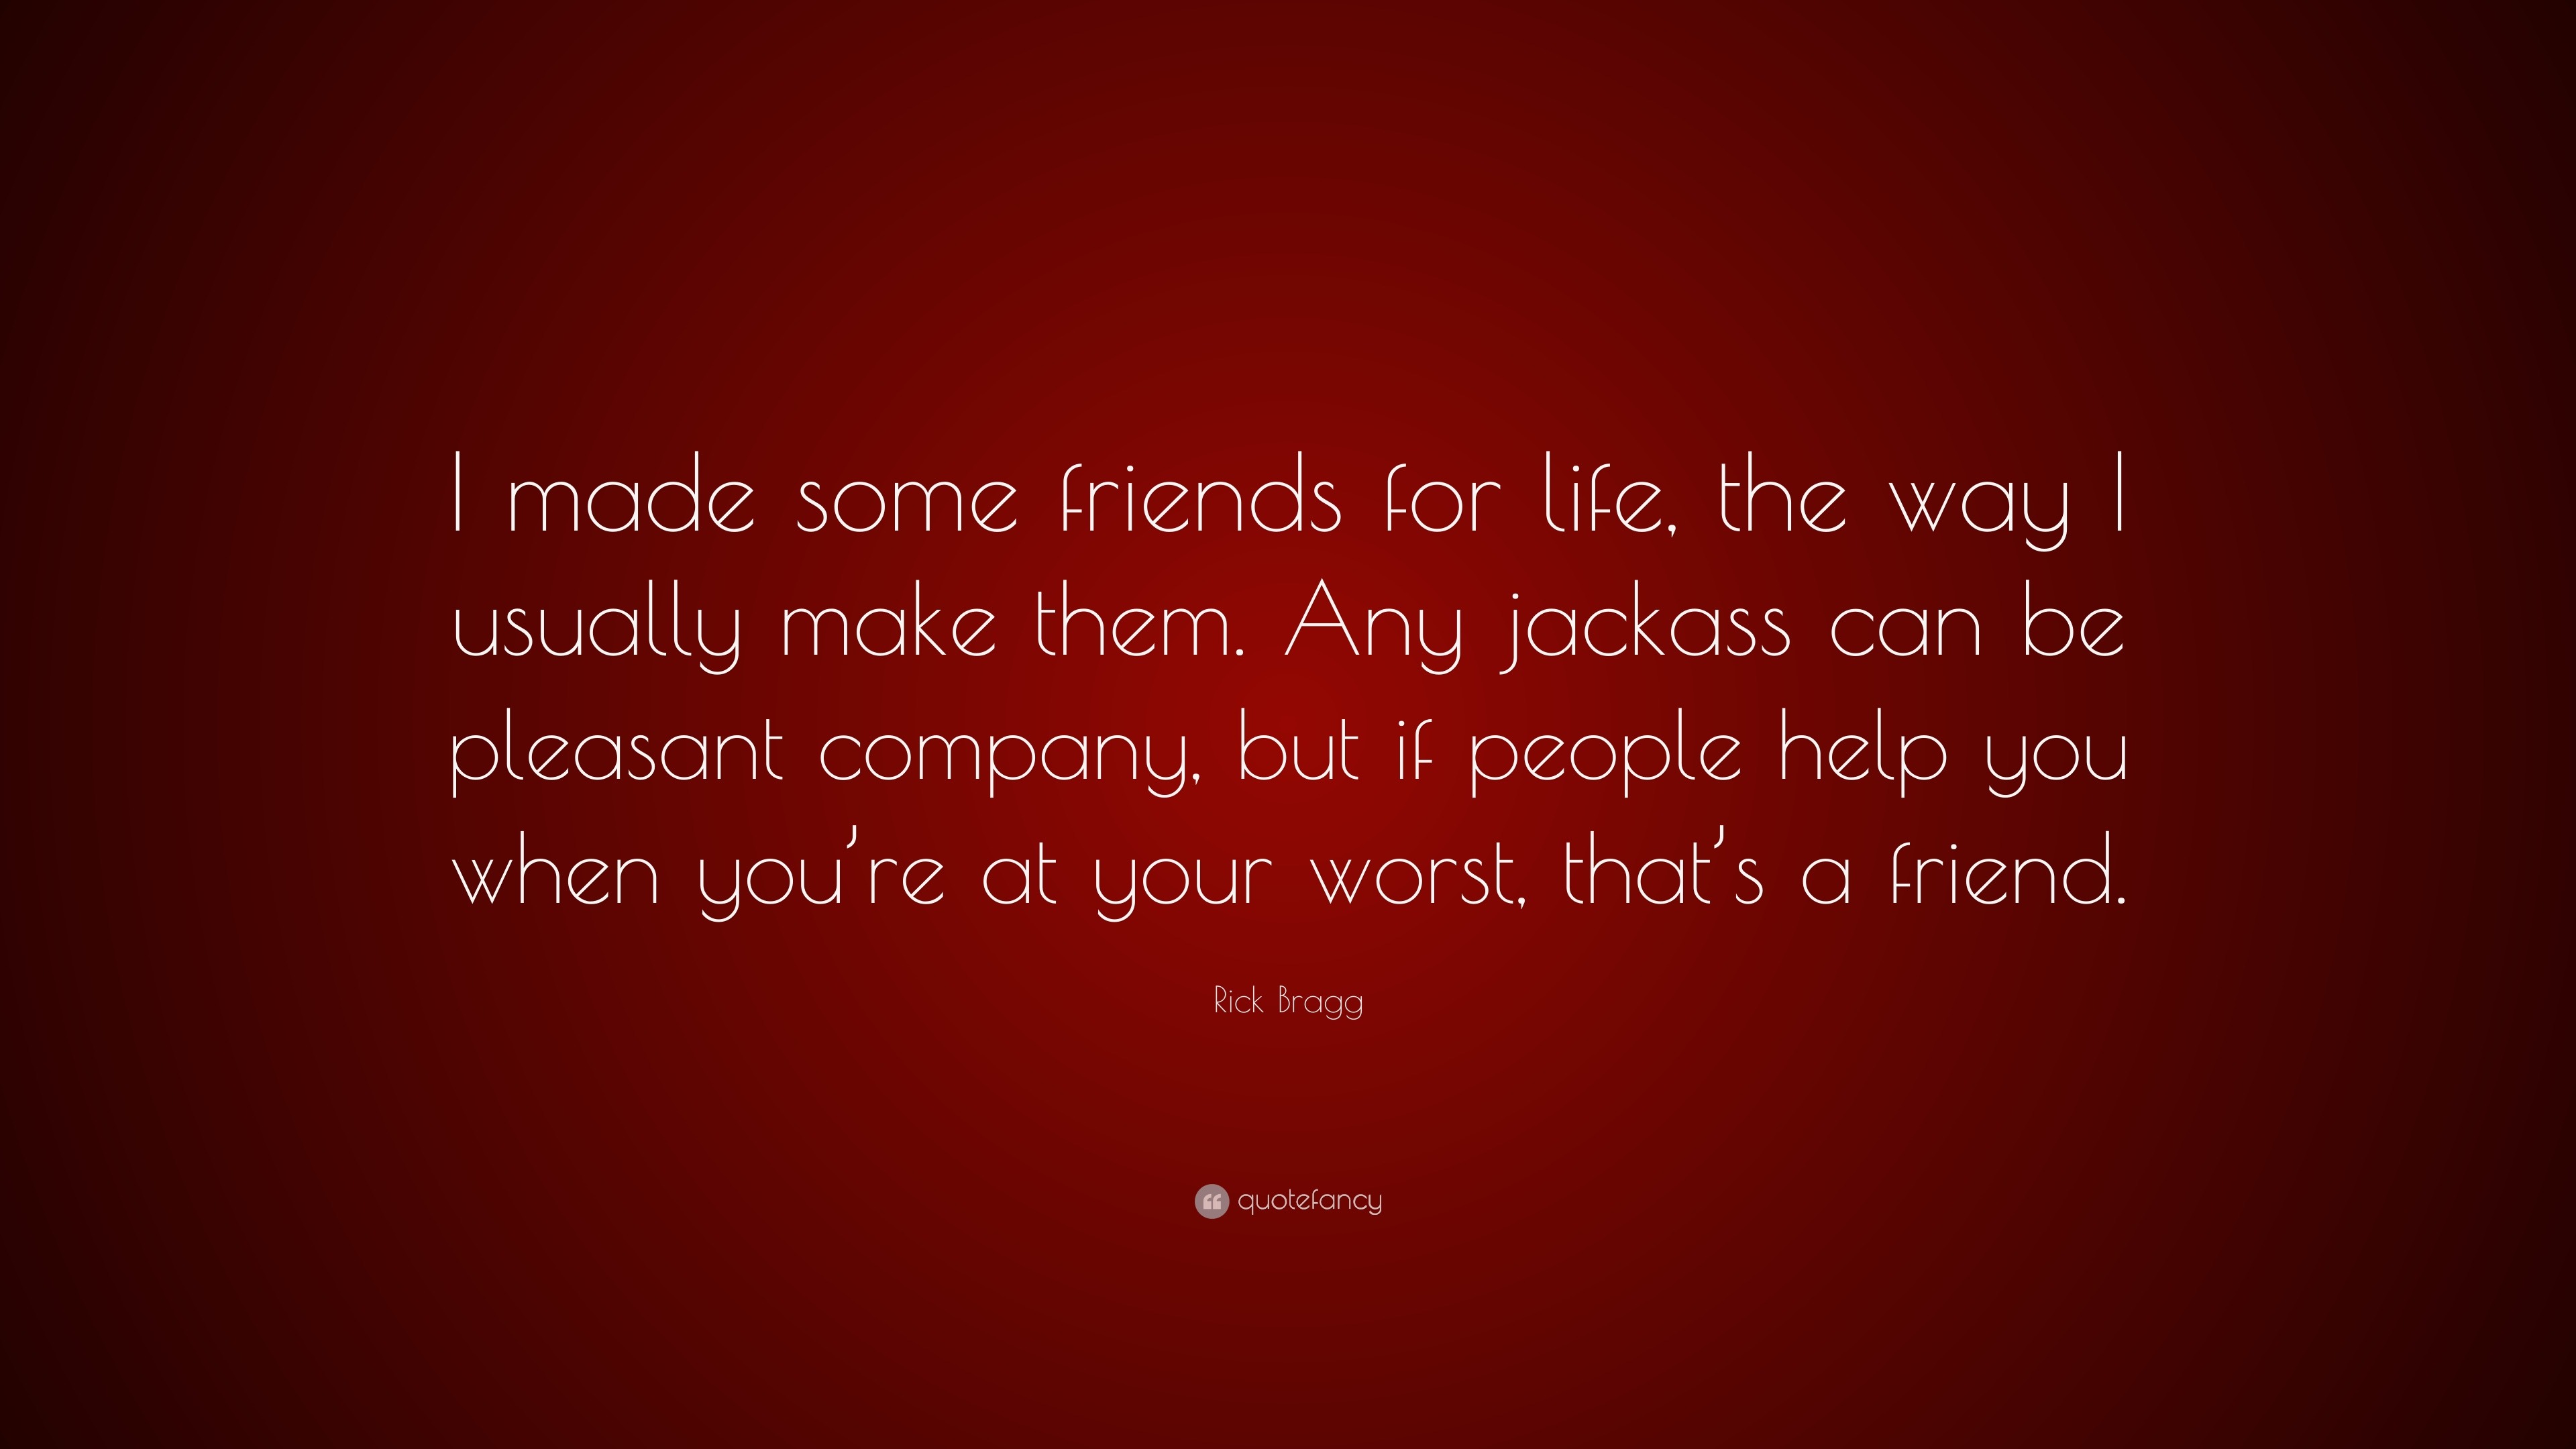 Rick Bragg Quote “I made some friends for life the way I usually